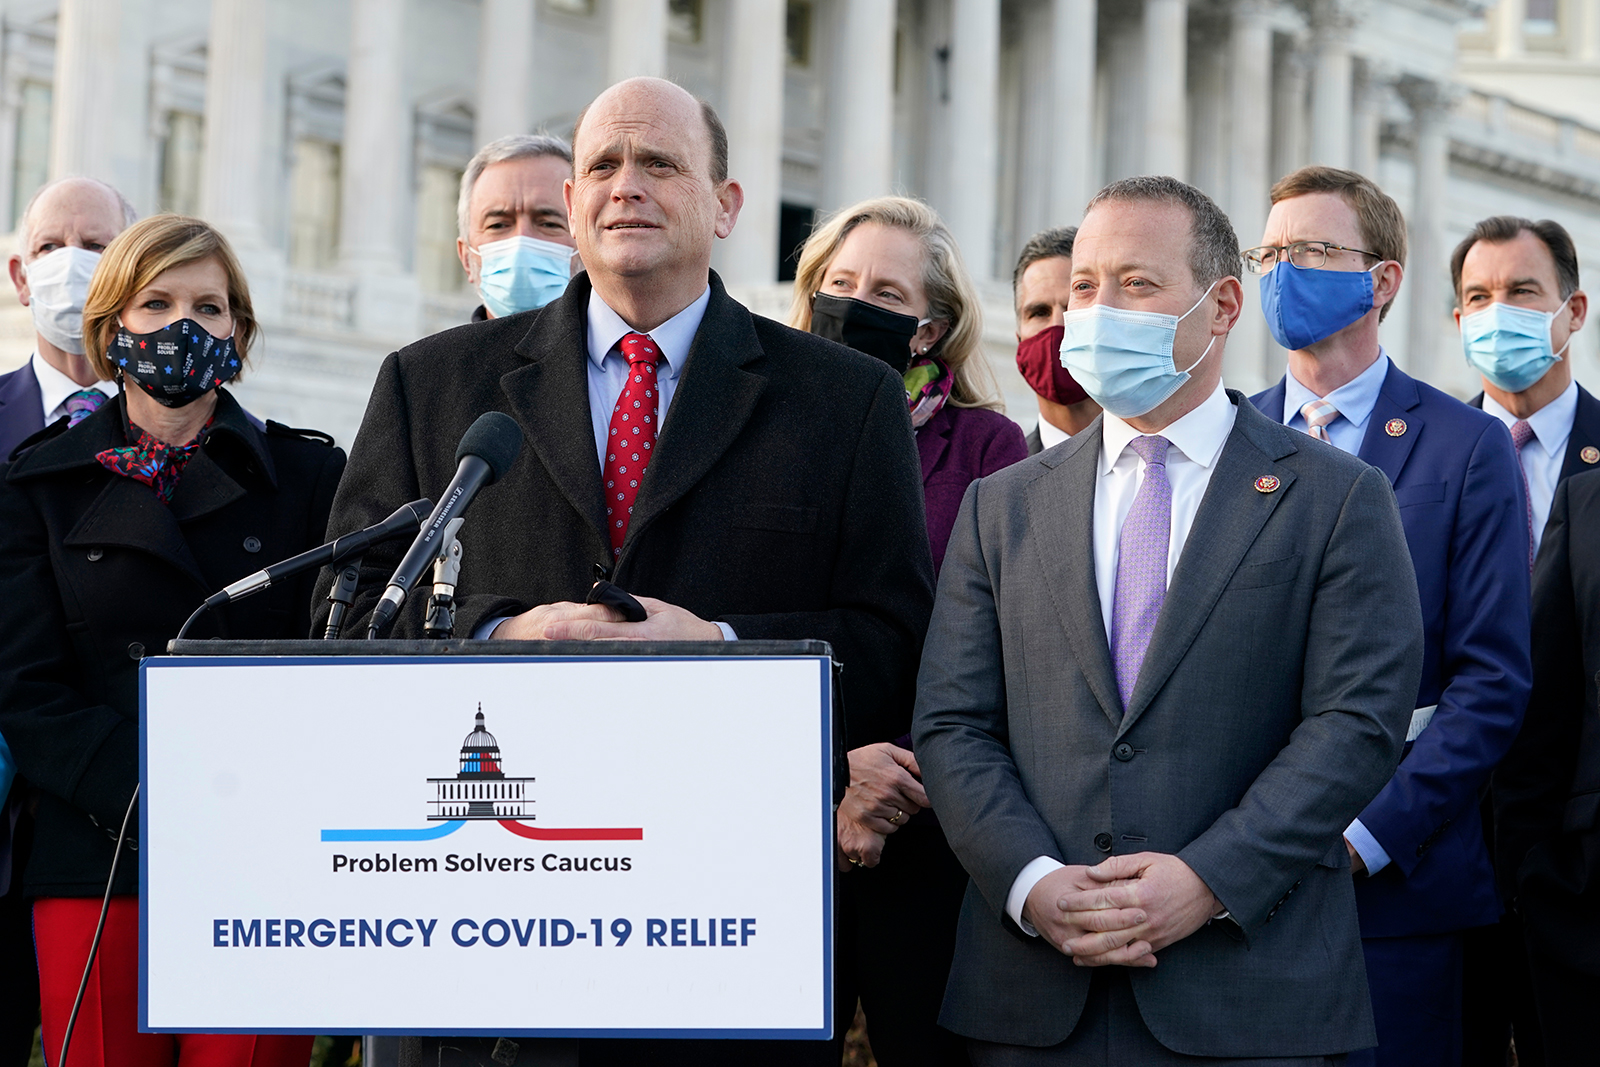 Problem Solvers Caucus co-chairs Rep. Tom Reed, at podium, and Rep. Josh Gottheimer, right, speak to the media with members of their caucus about the expected passage of the emergency Covid-19 relief bill, on Monday at Capitol Hill in Washington.